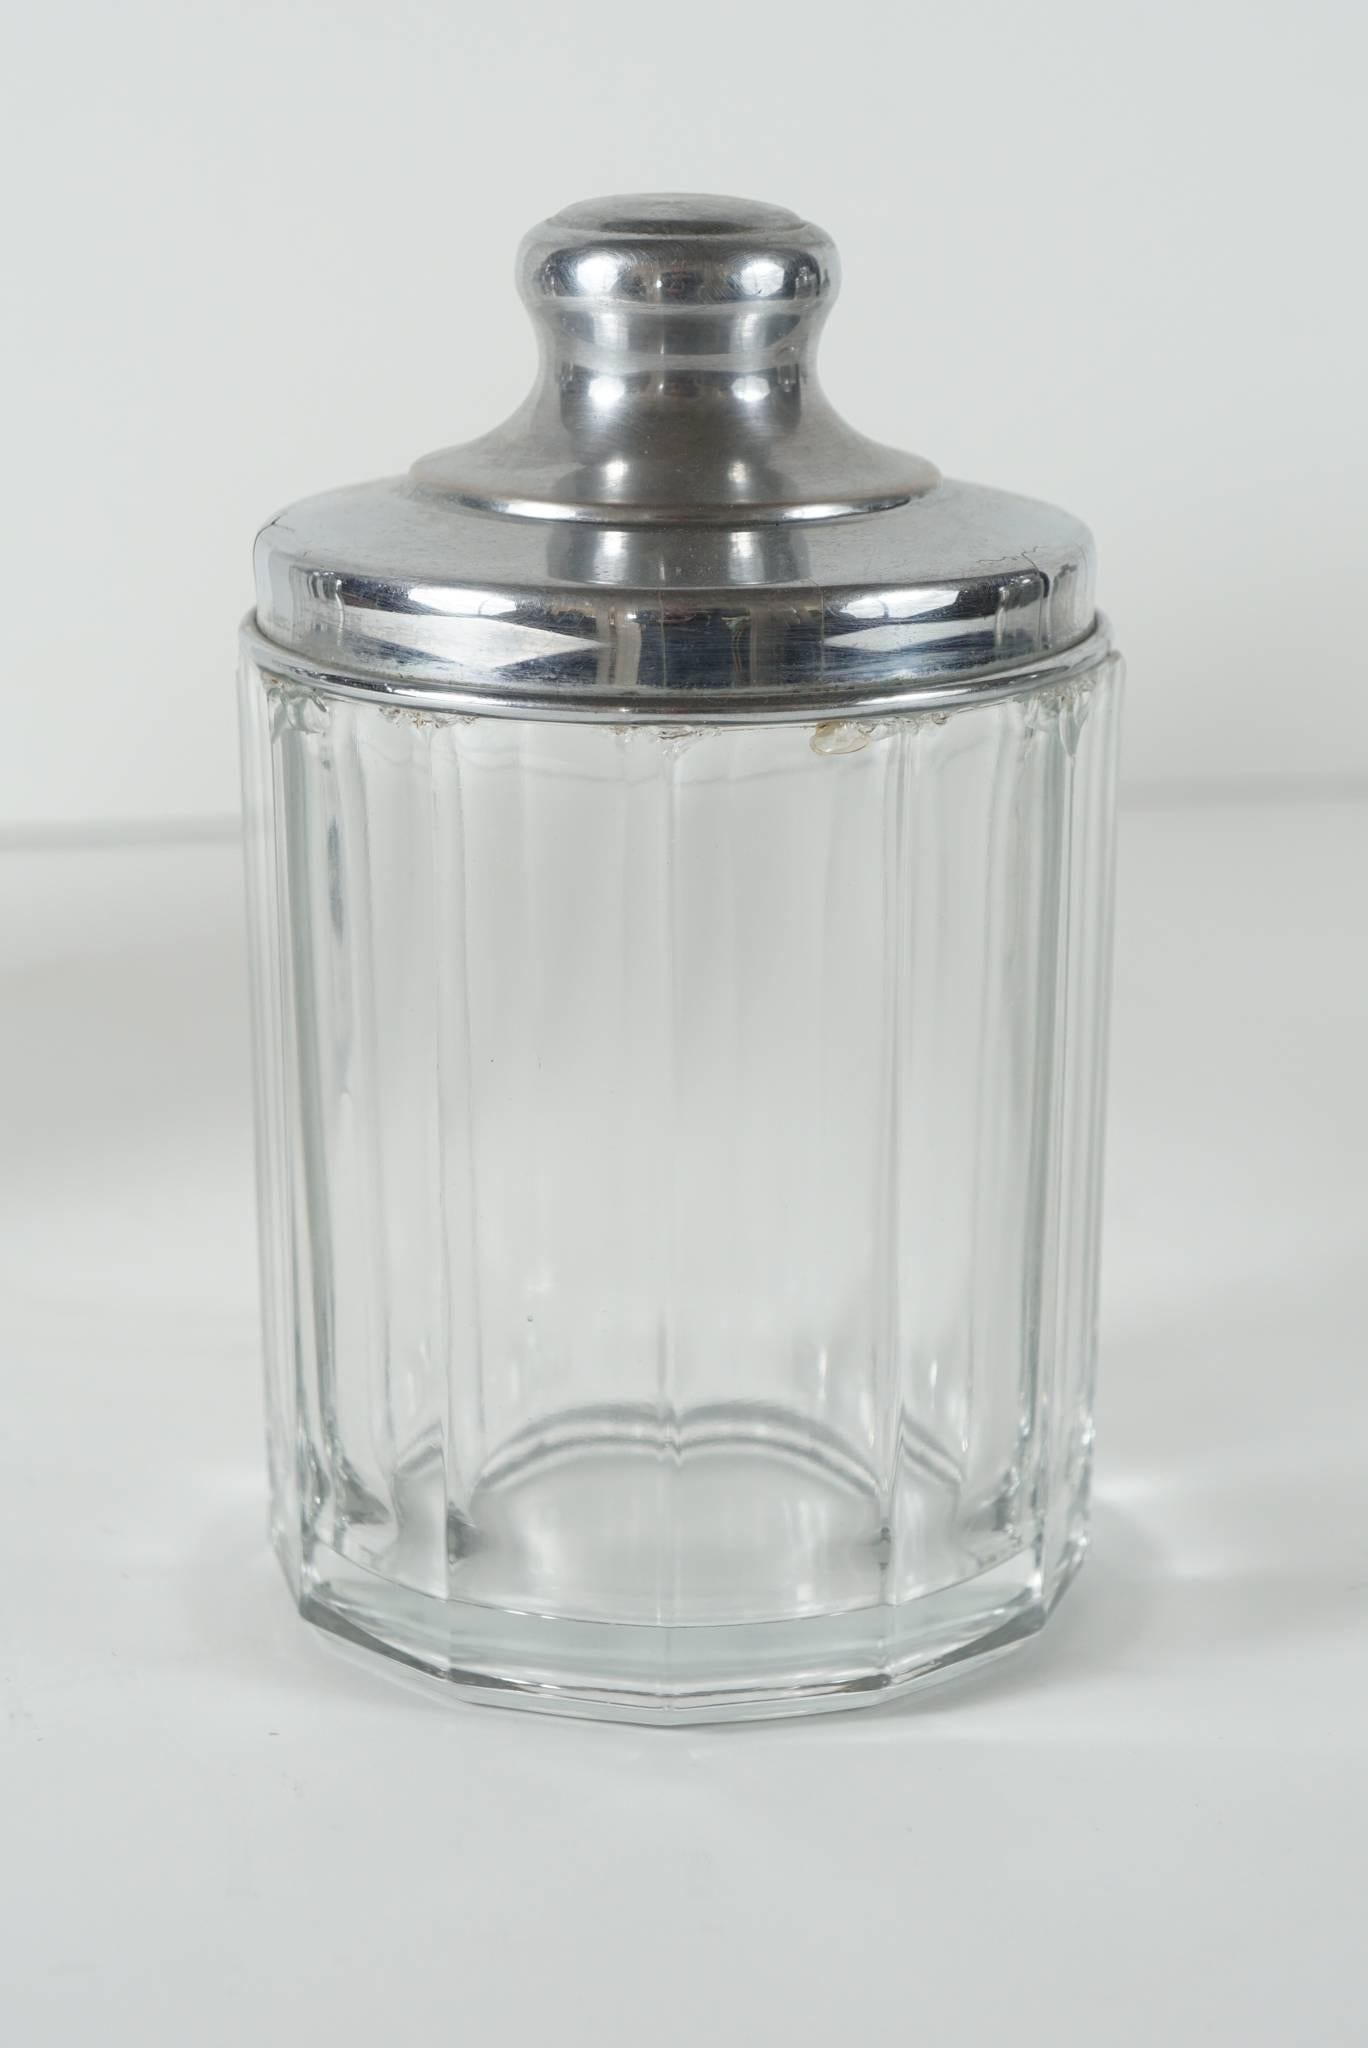 Plated Early 20th Century Glass Canister Jars from the Estate of Bunny Mellon